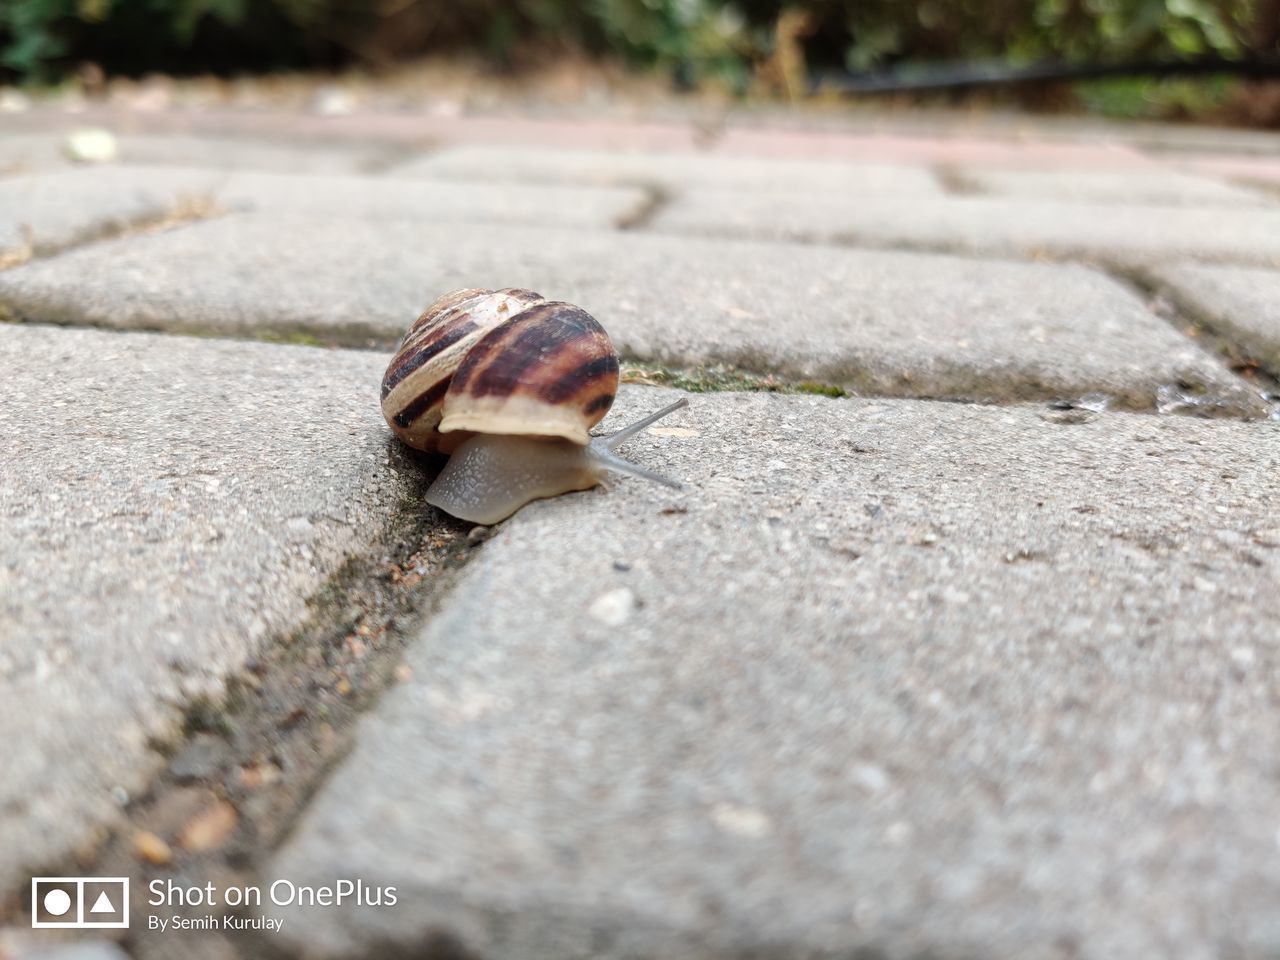 SURFACE LEVEL OF SNAIL ON GROUND